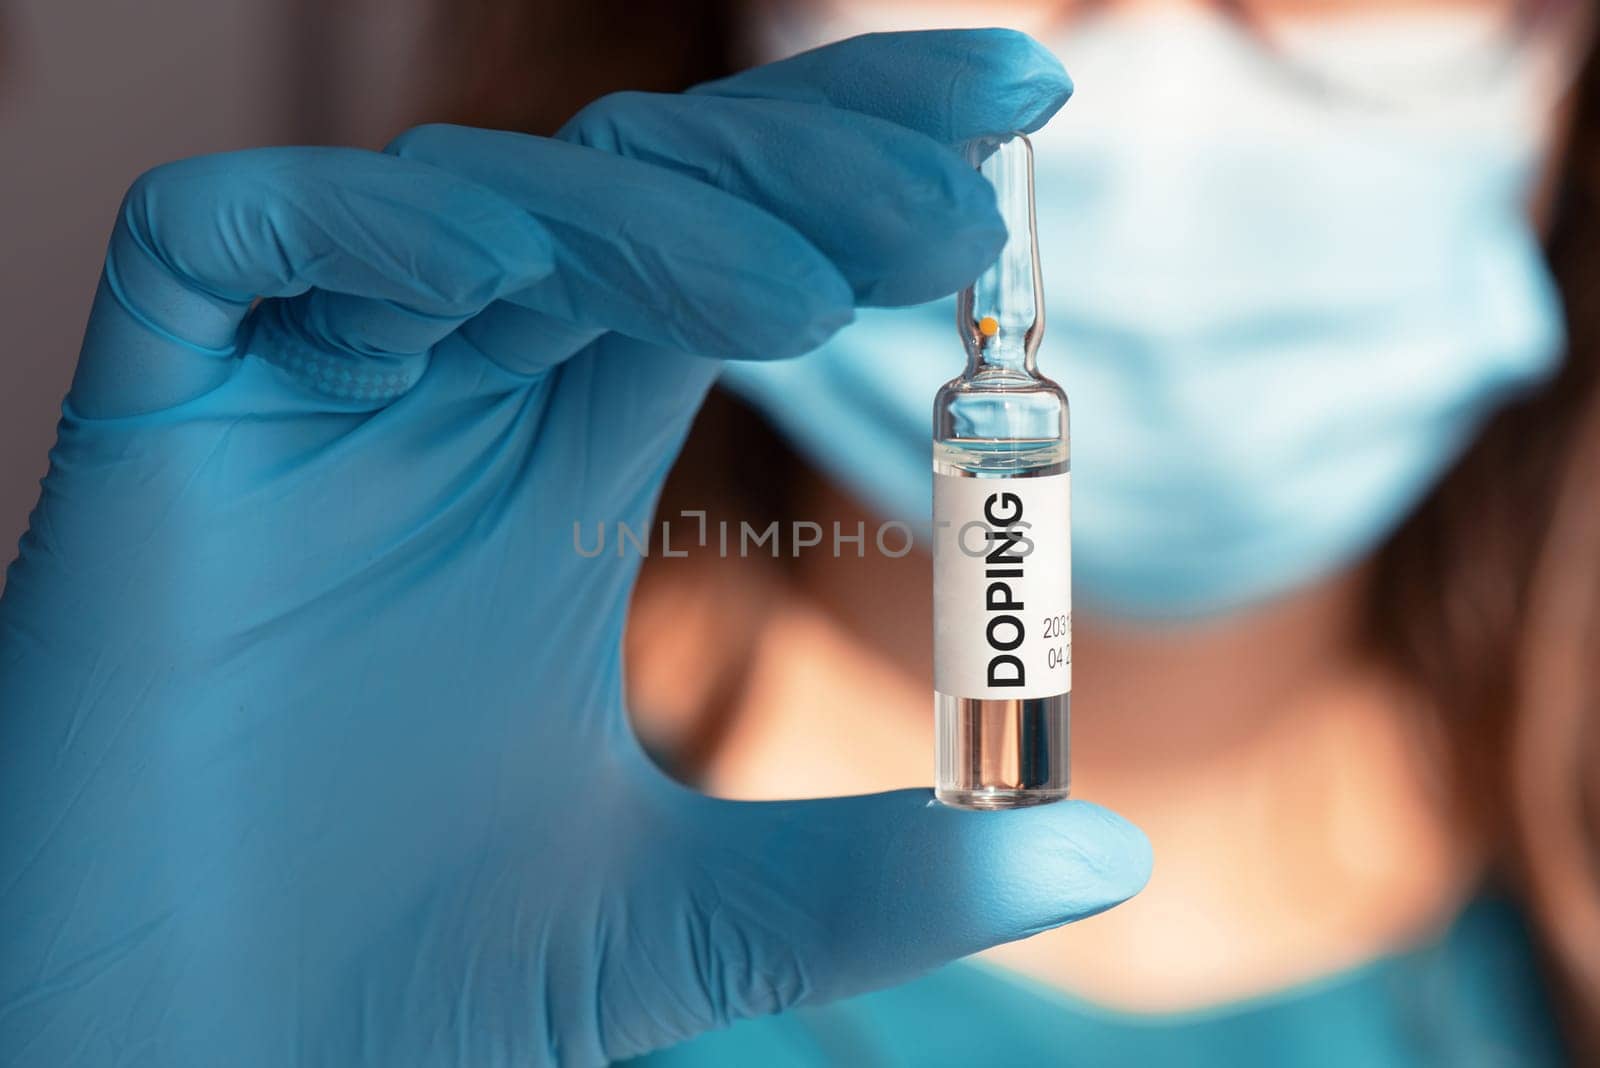 A doping ampoule in a nurse's hand closeup photo, sports doping addiction concept